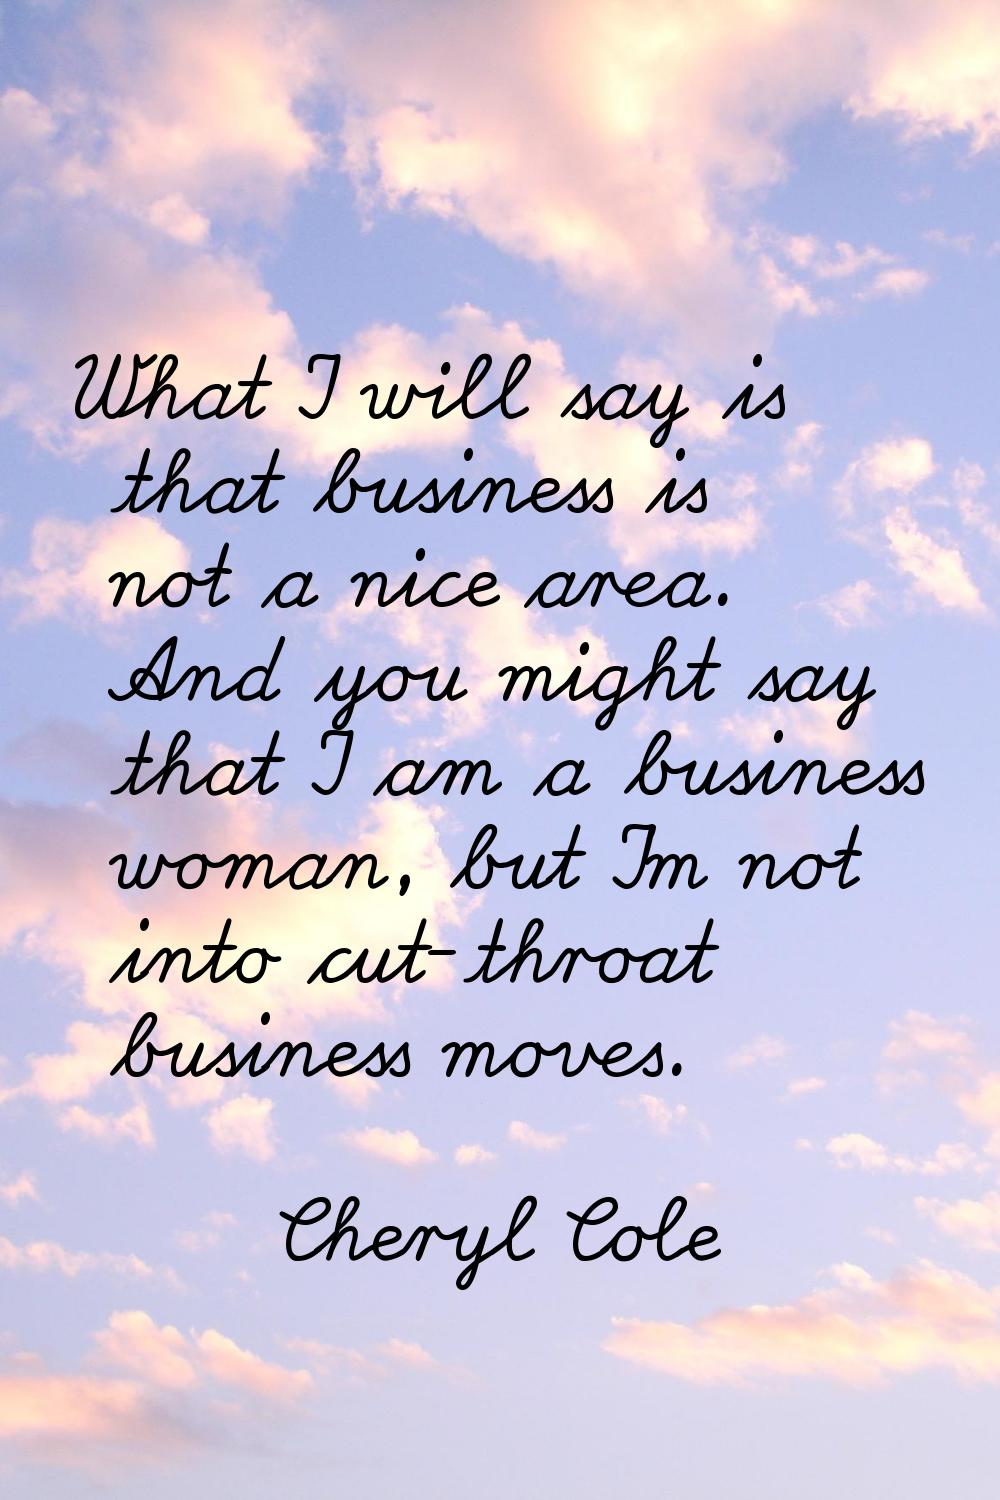 What I will say is that business is not a nice area. And you might say that I am a business woman, 